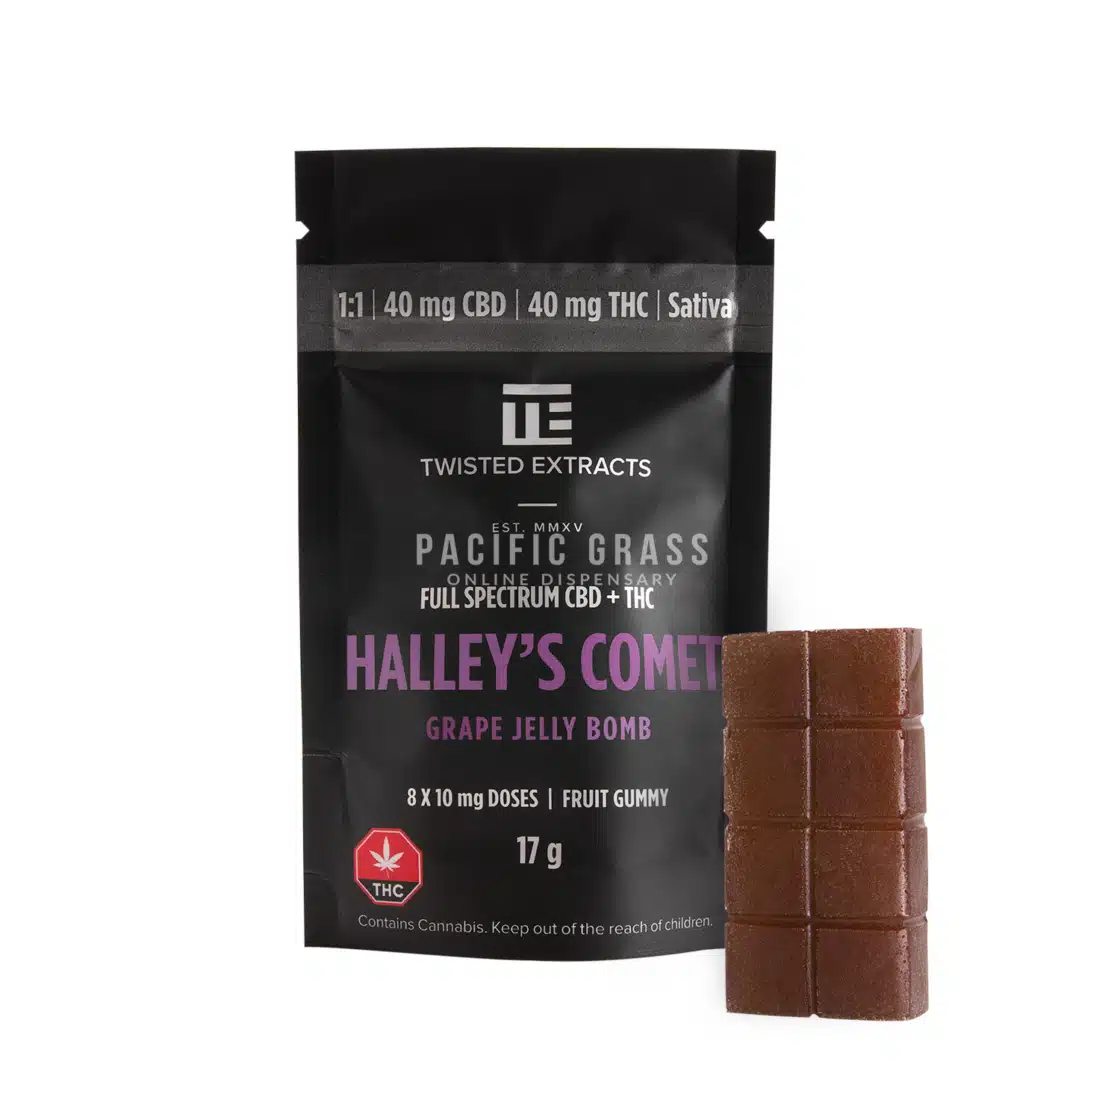 Twisted Extracts Halley's Comet 1:1 Jelly Bomb Grape